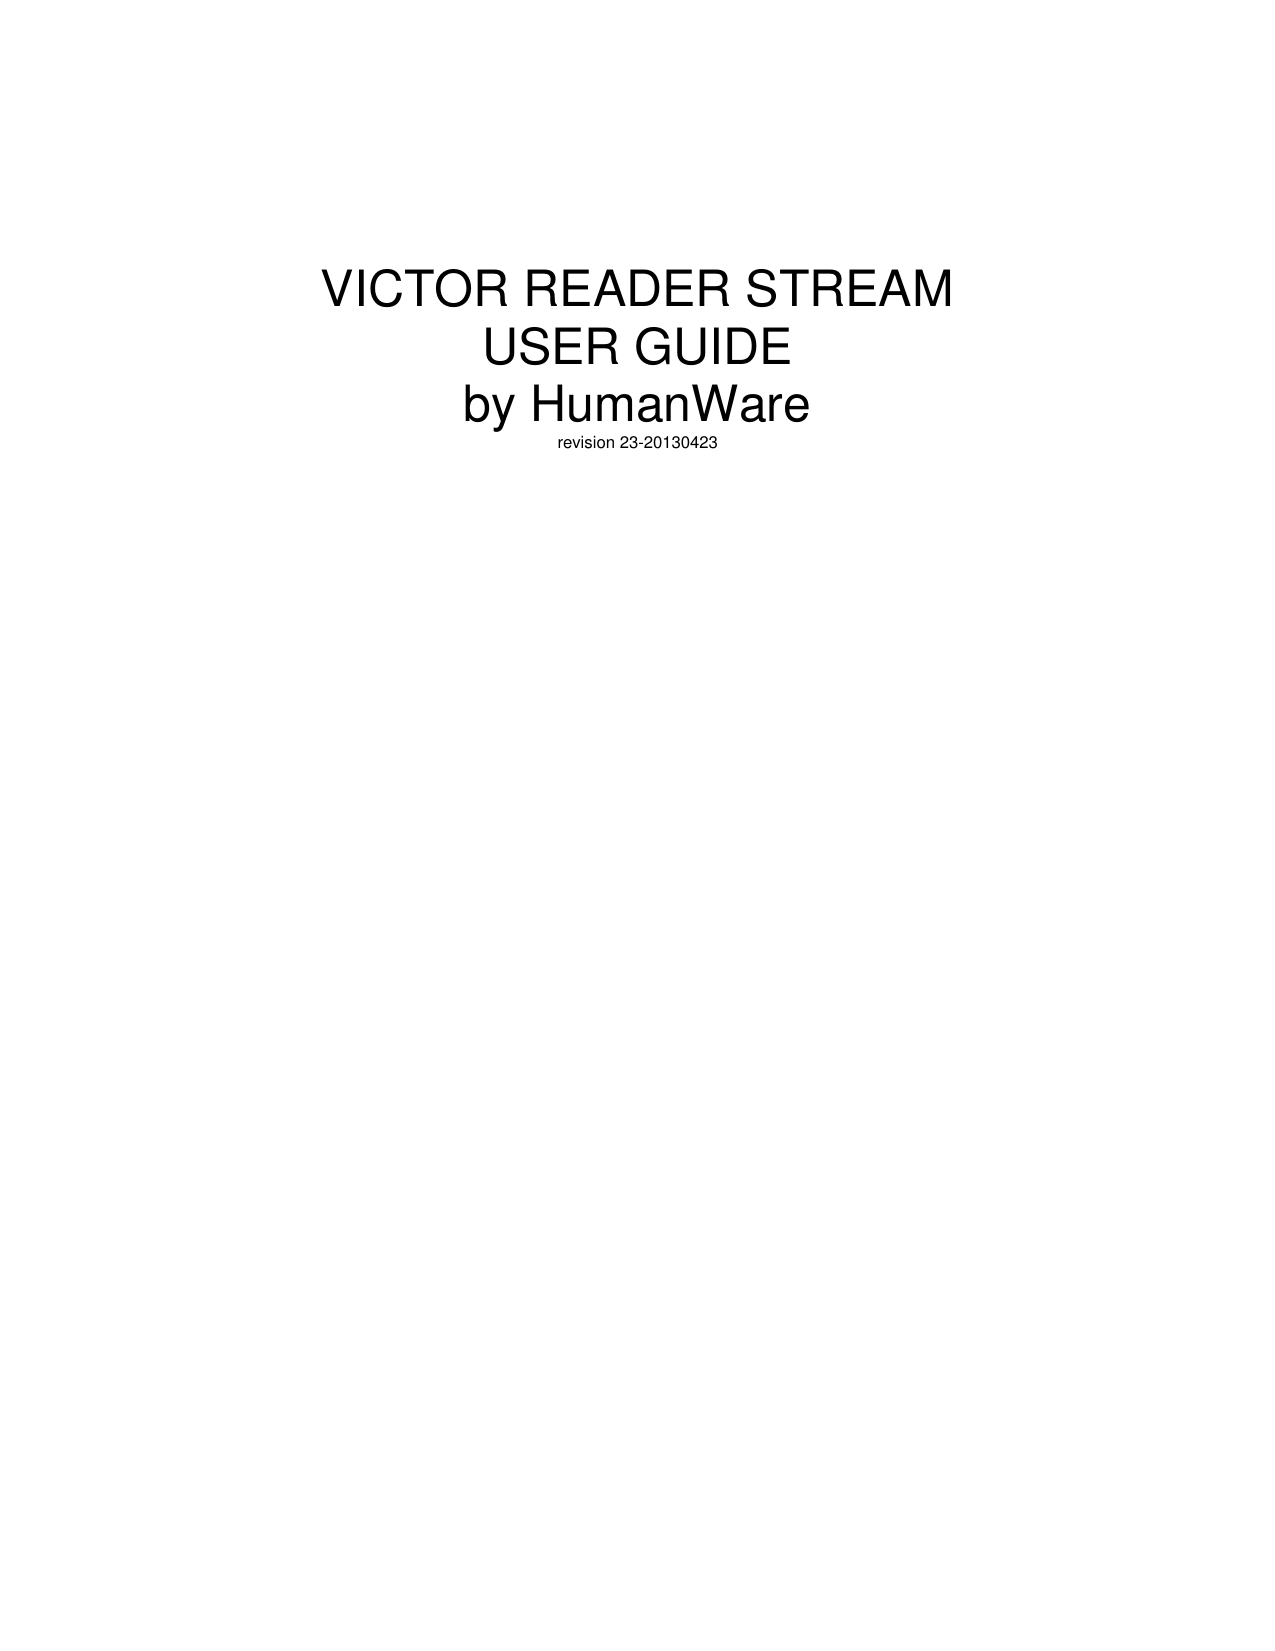    VICTOR READER STREAM USER GUIDE by HumanWare revision 23-20130423    